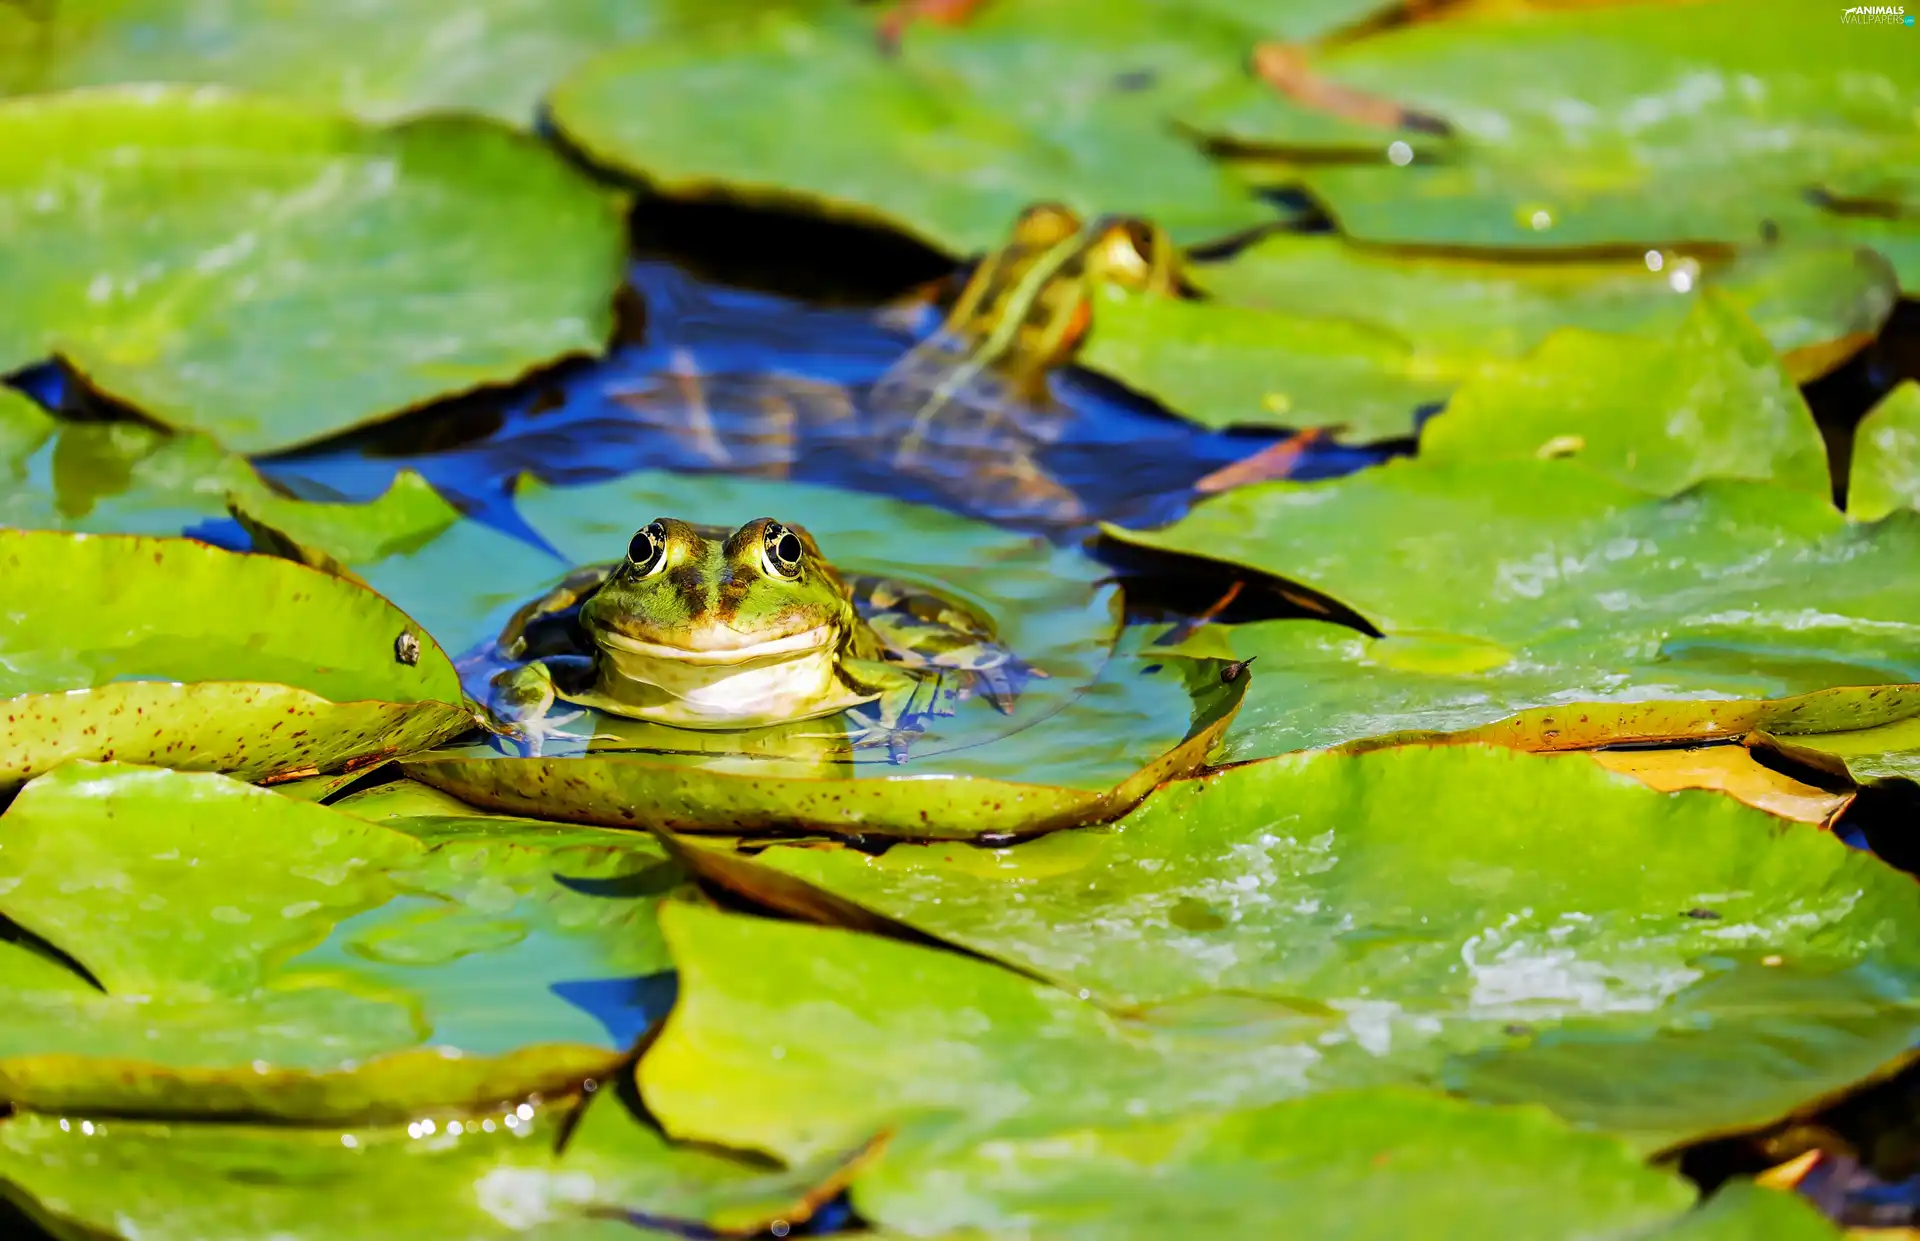 Leaf, Frogs, water